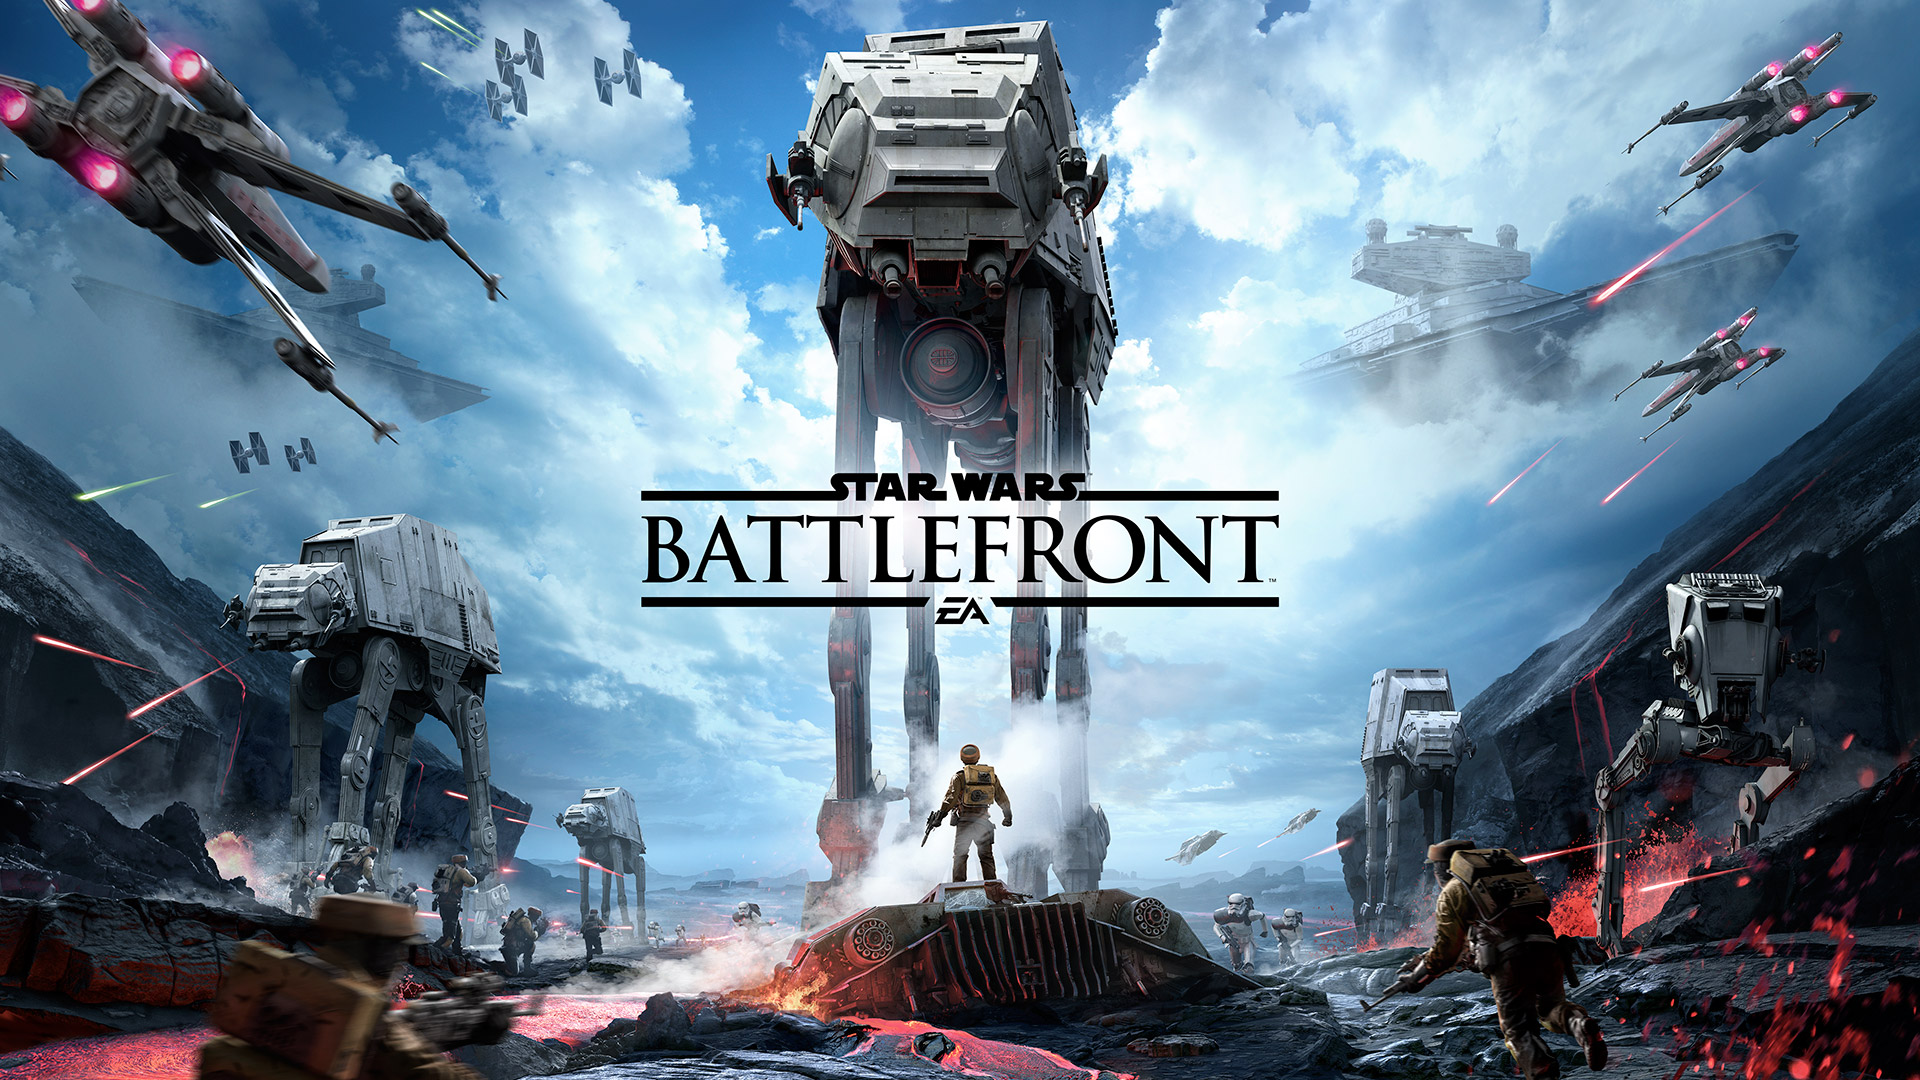 Star Wars Battlefront Launches With Multiplayer Maps Details On